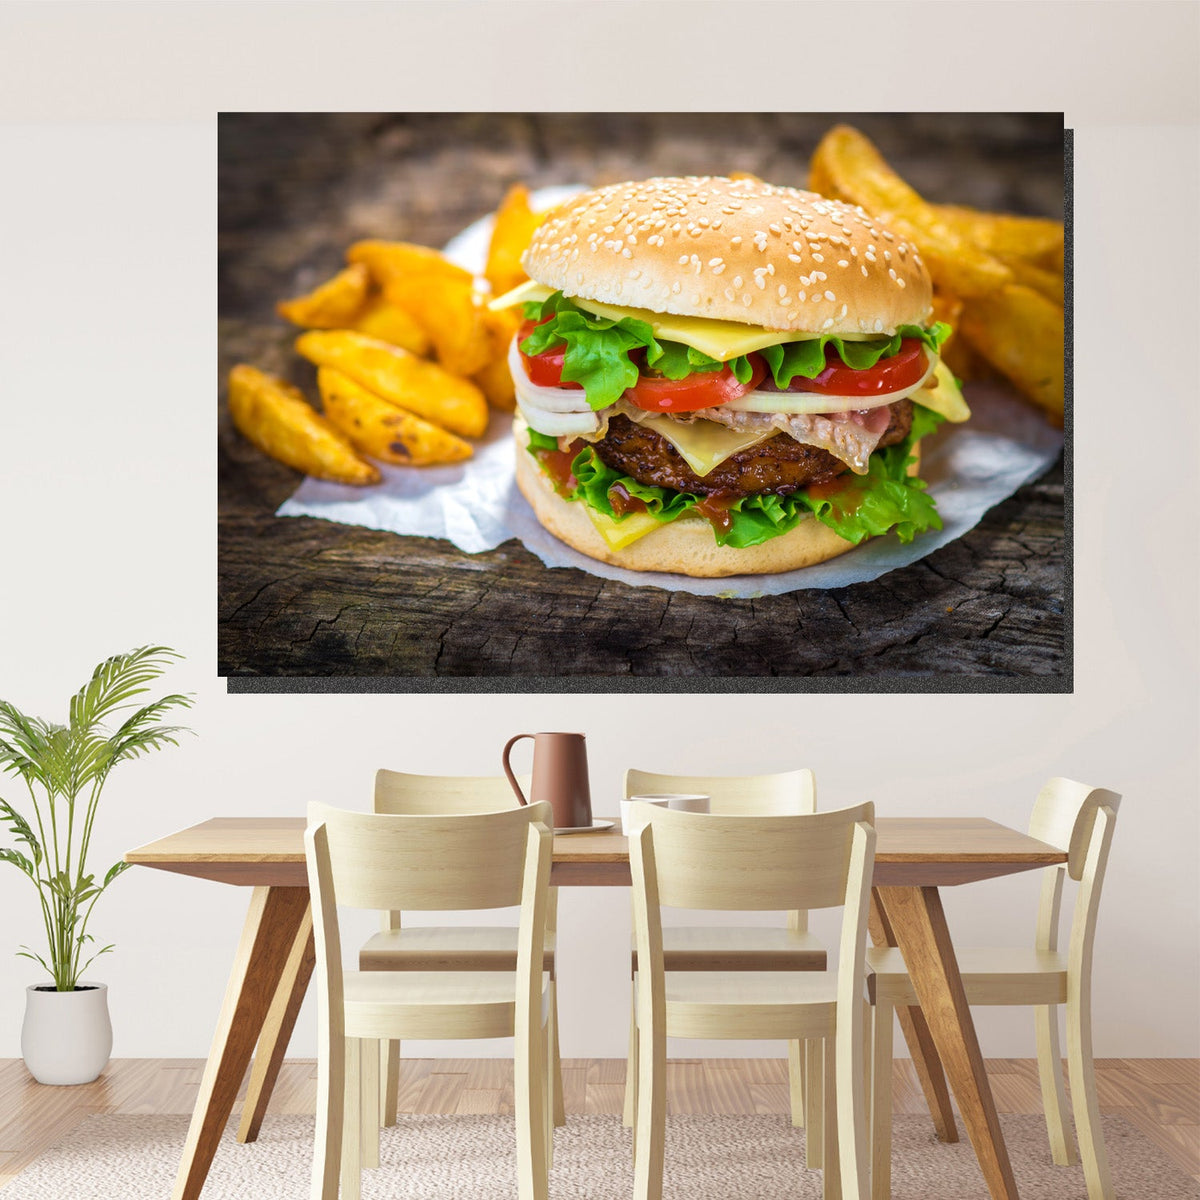 https://cdn.shopify.com/s/files/1/0387/9986/8044/products/BurgerwithpotatowedgesCanvasArtprintStretched-1.jpg